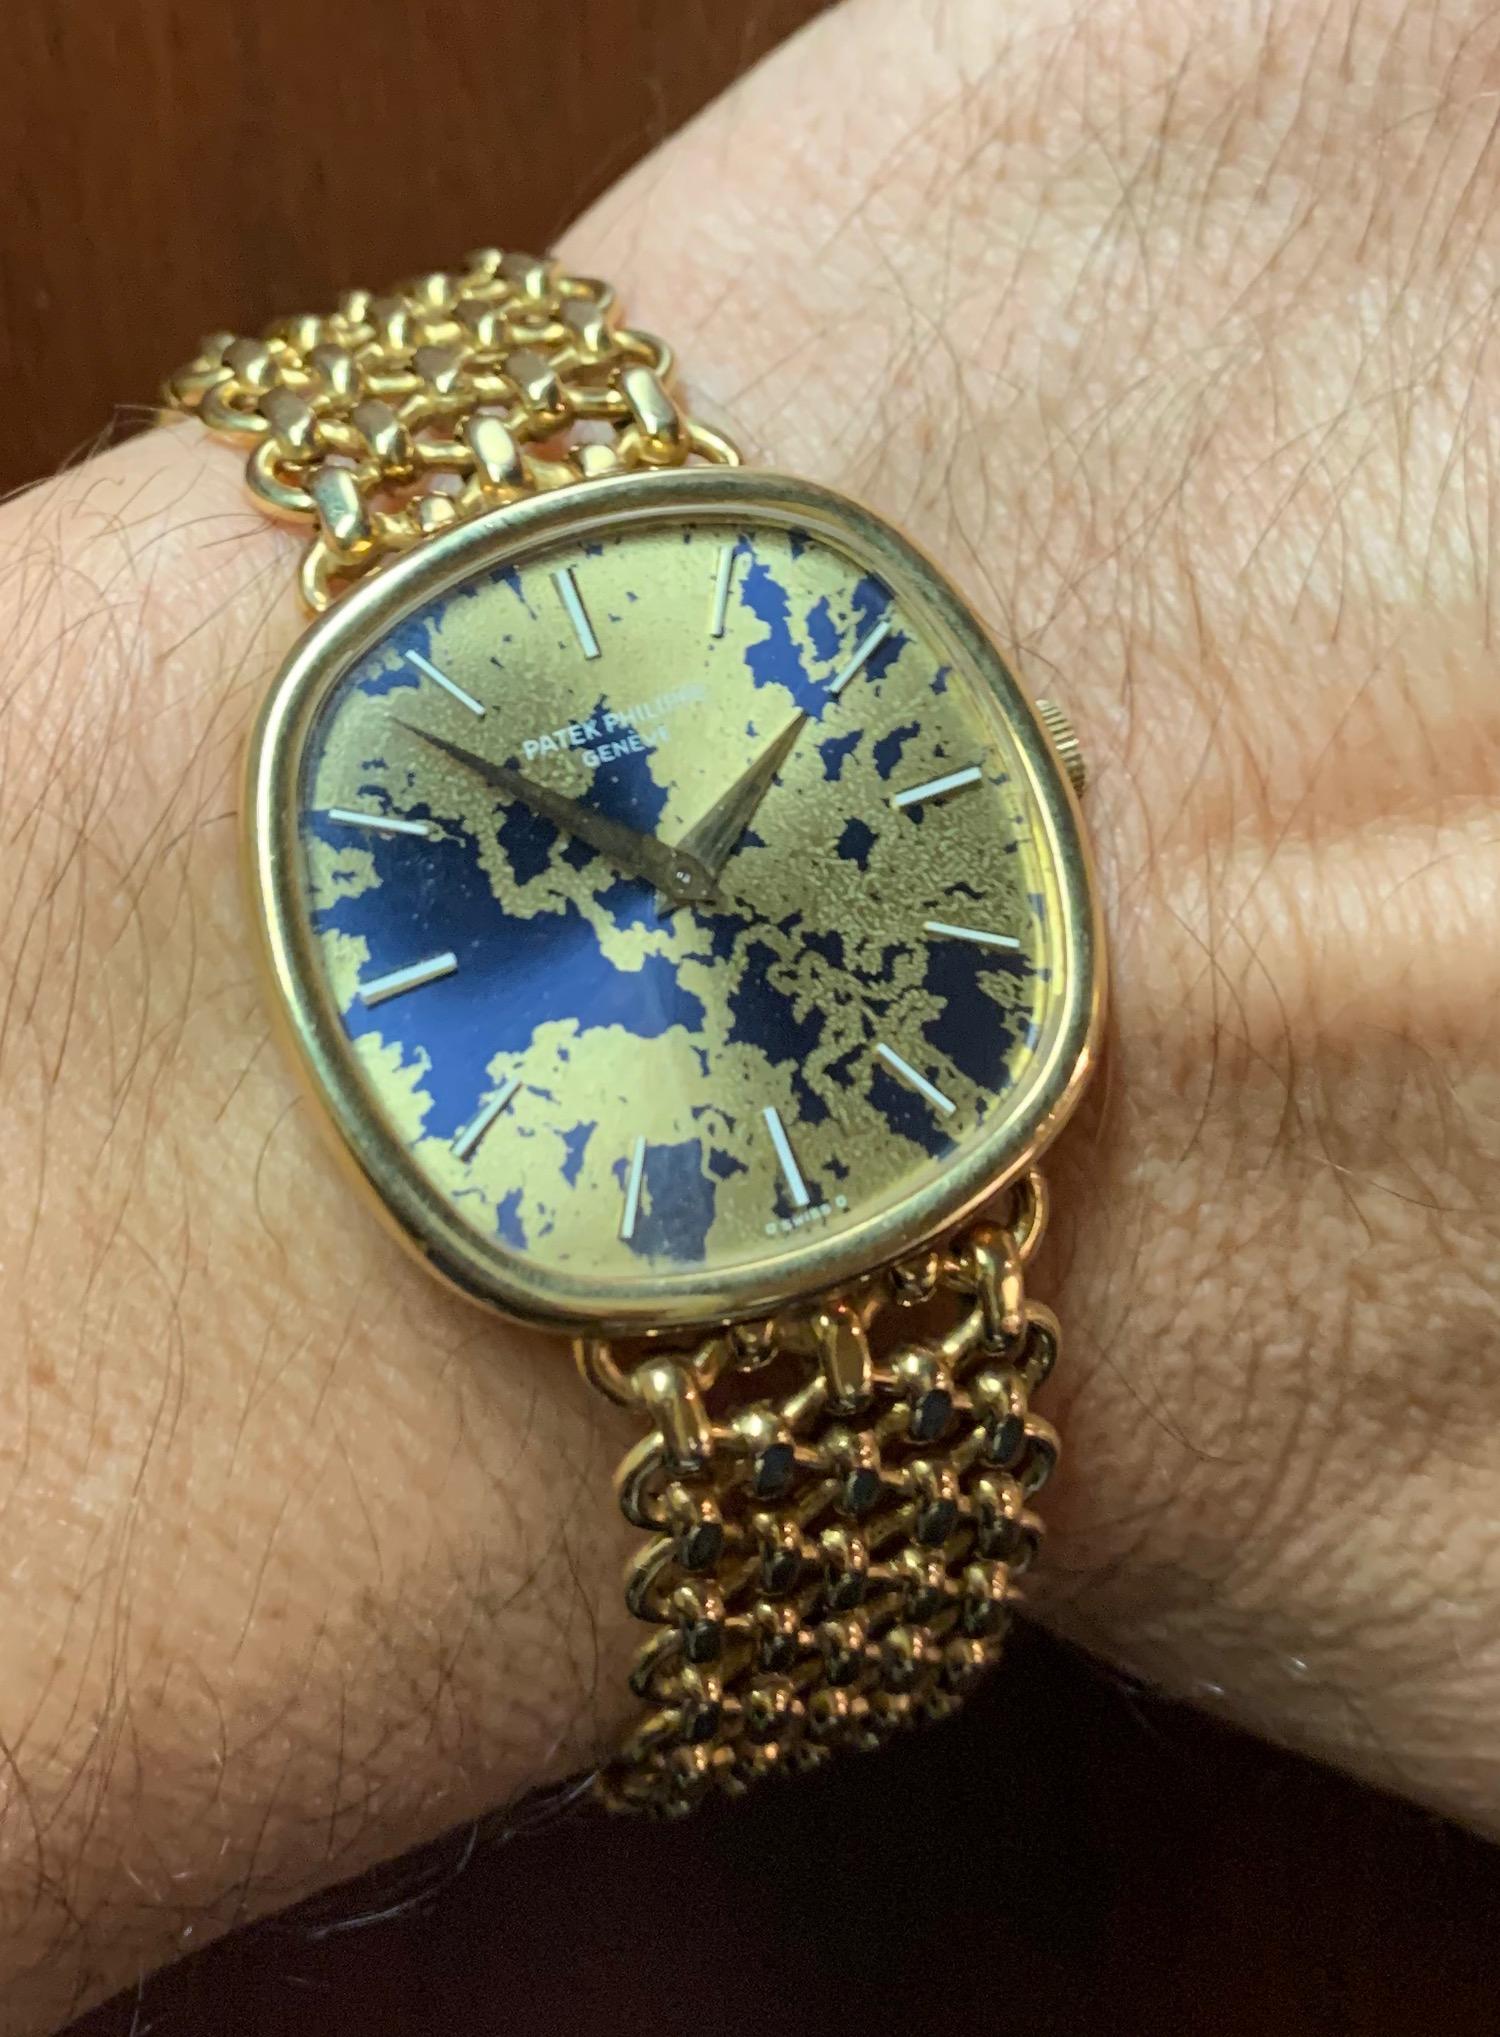 Modern Unique Patek Philippe 3844 with Amazing Worldmap Dial / 4. of july ! For Sale